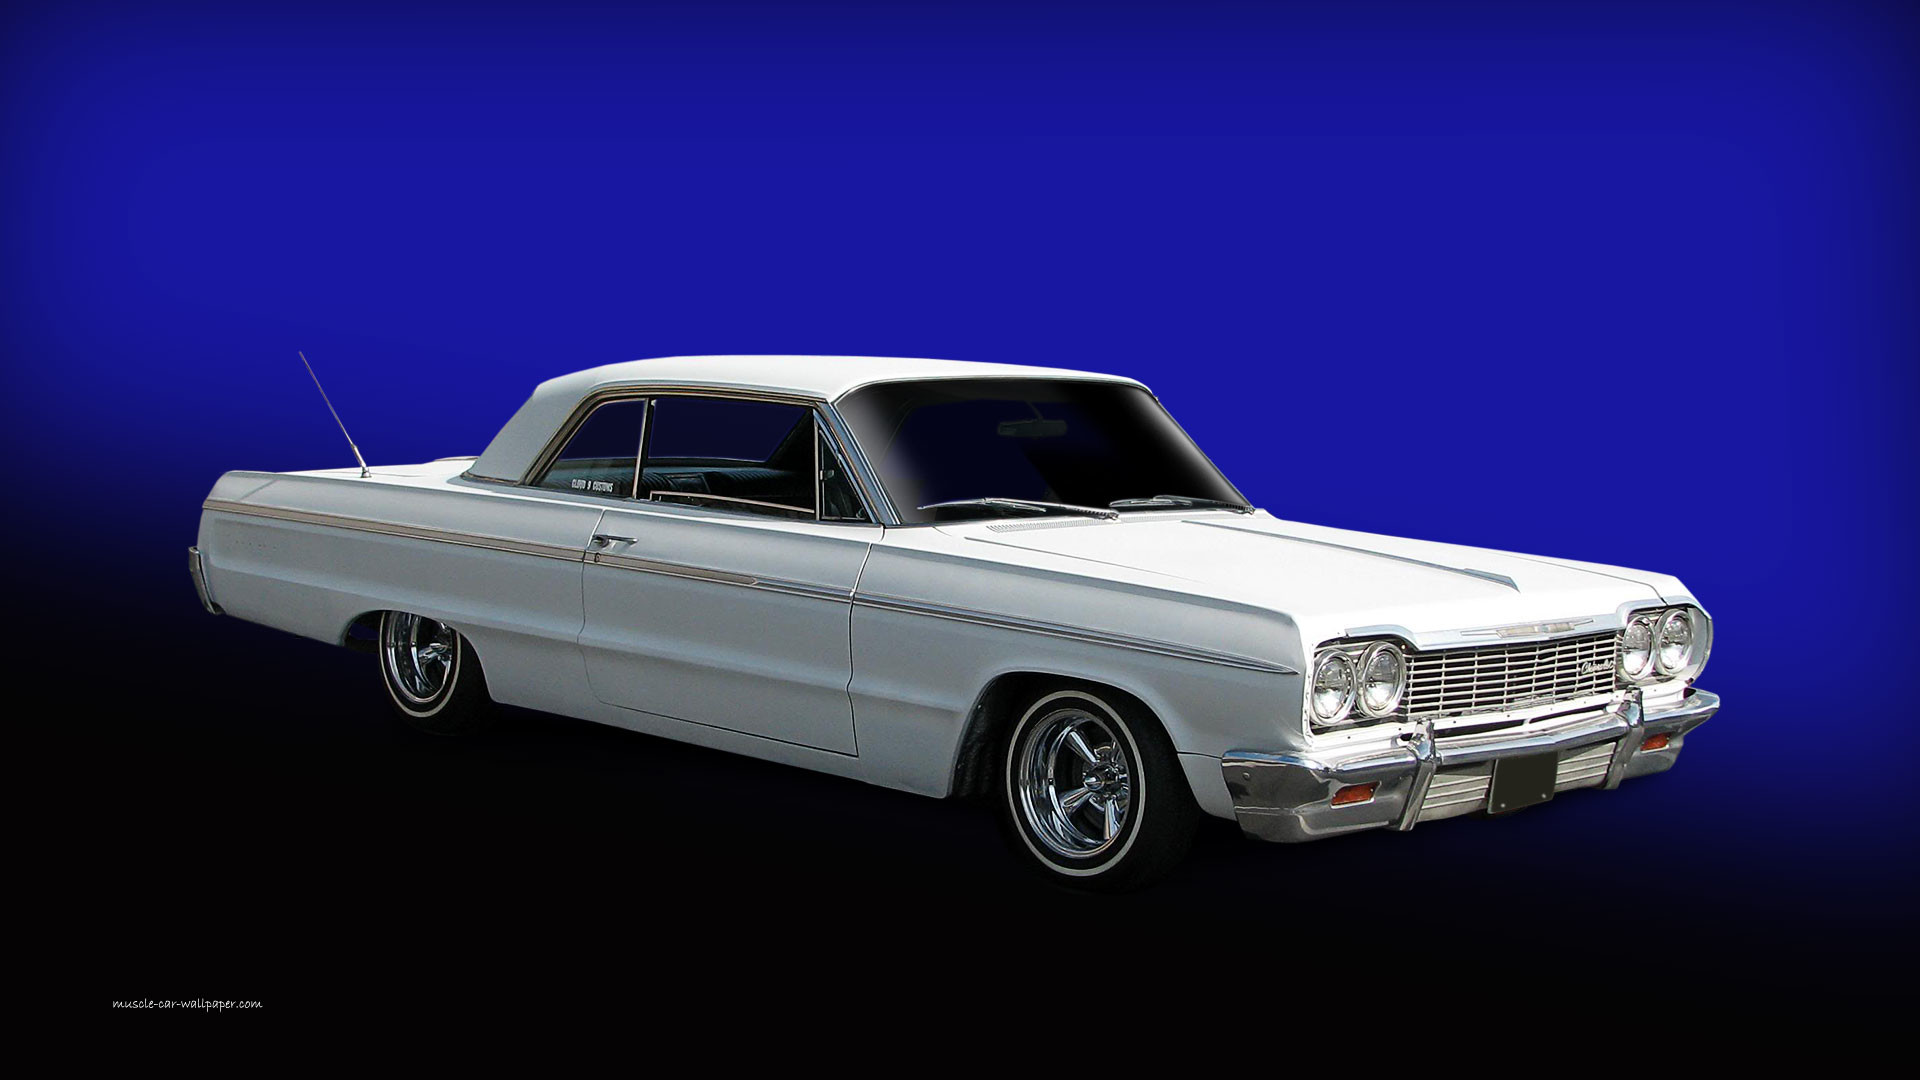 1920x1080 1964 Chevrolet Impala - Right Side View | 1920_01